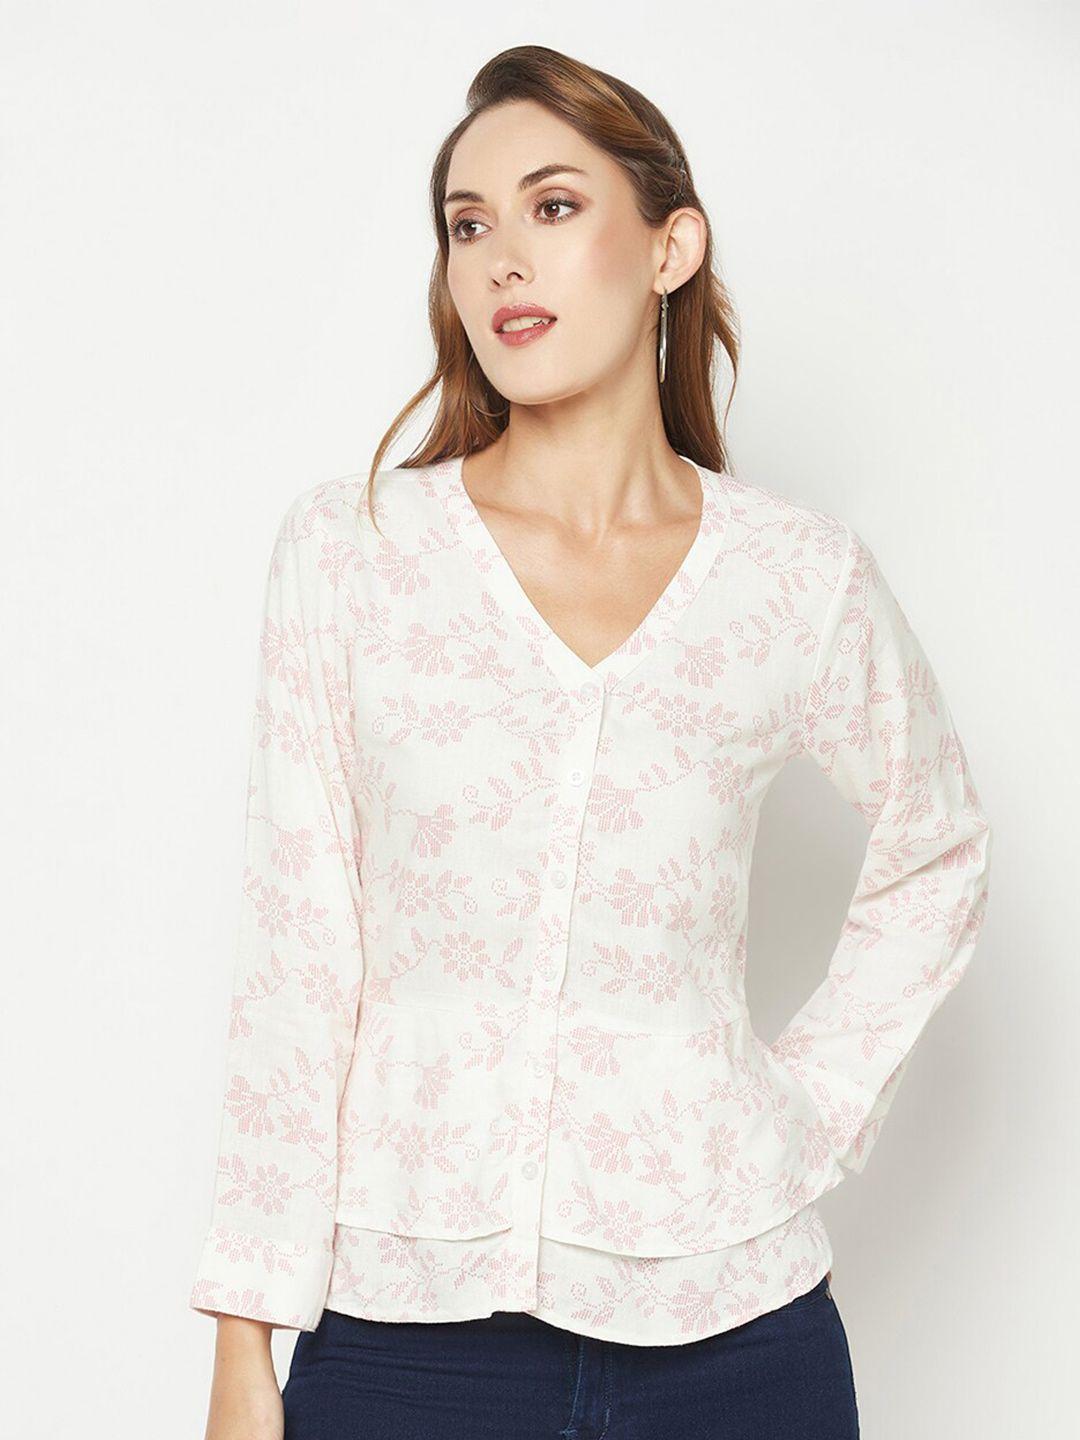 crimsoune-club-floral-printed-shirt-style-top